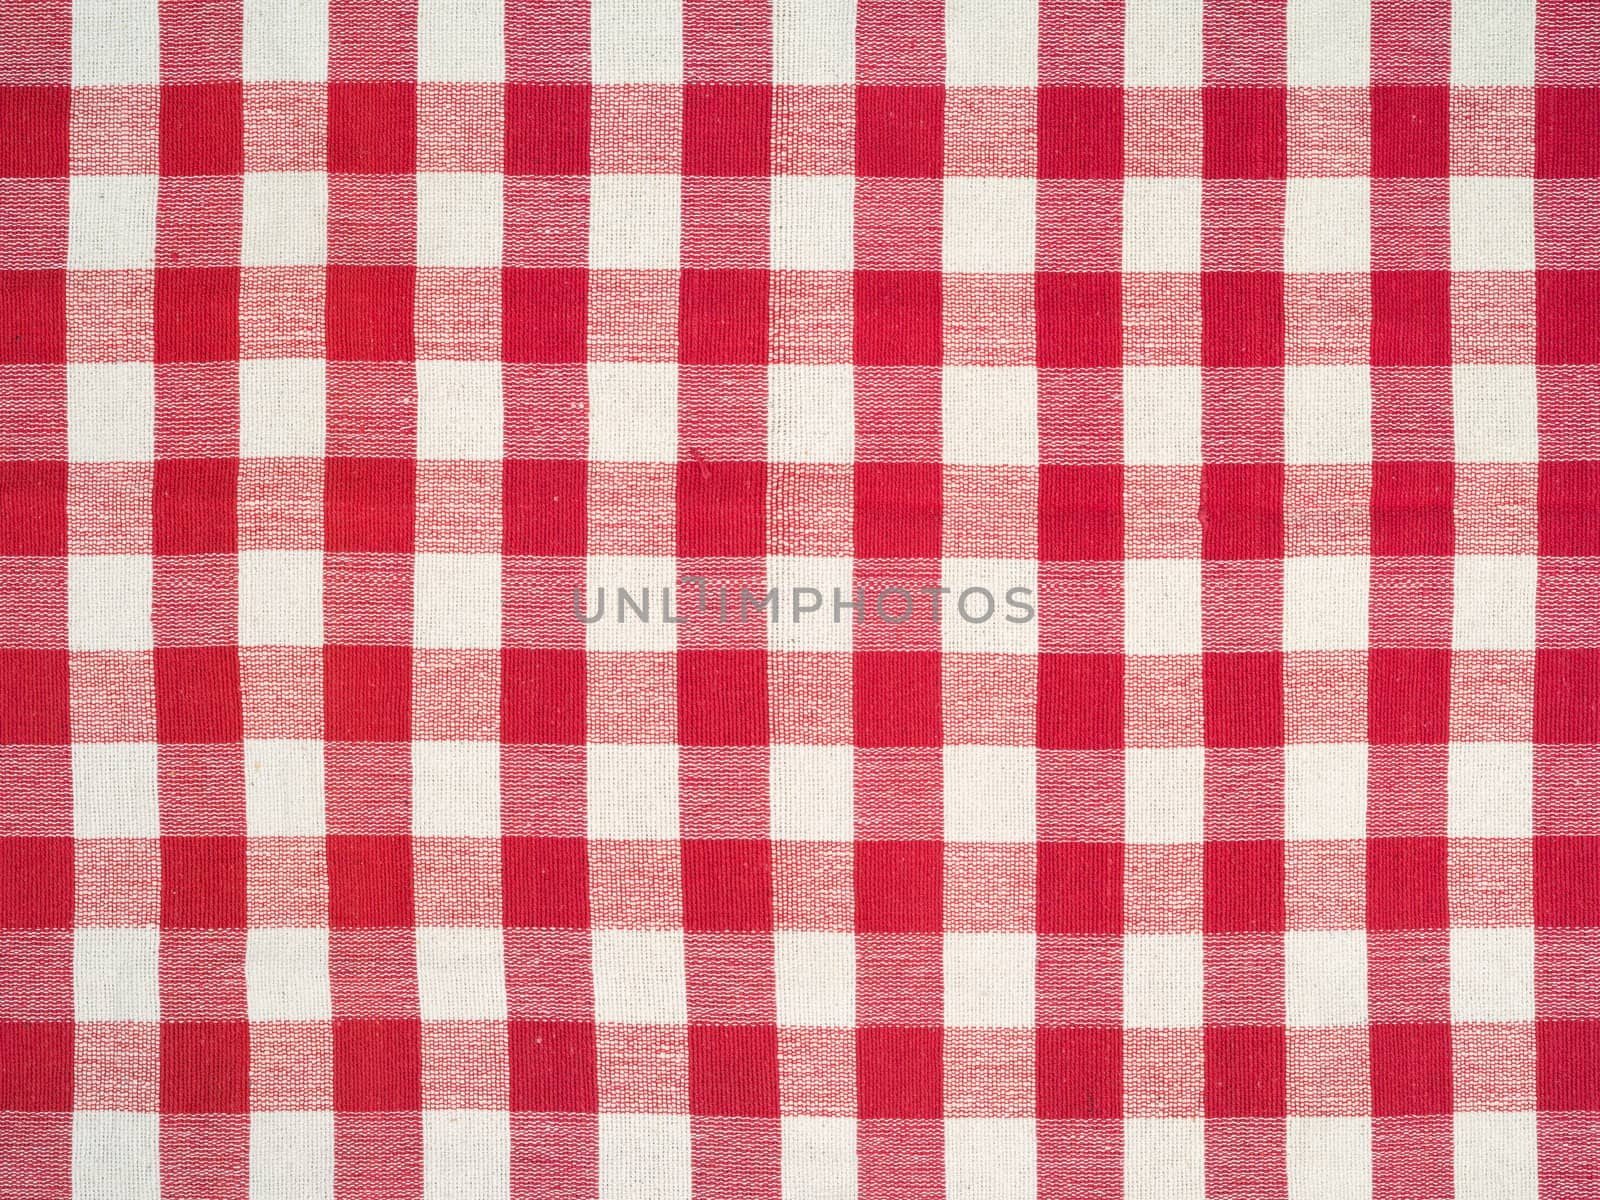 Photo of a traditional Italian tablecloth as a background.